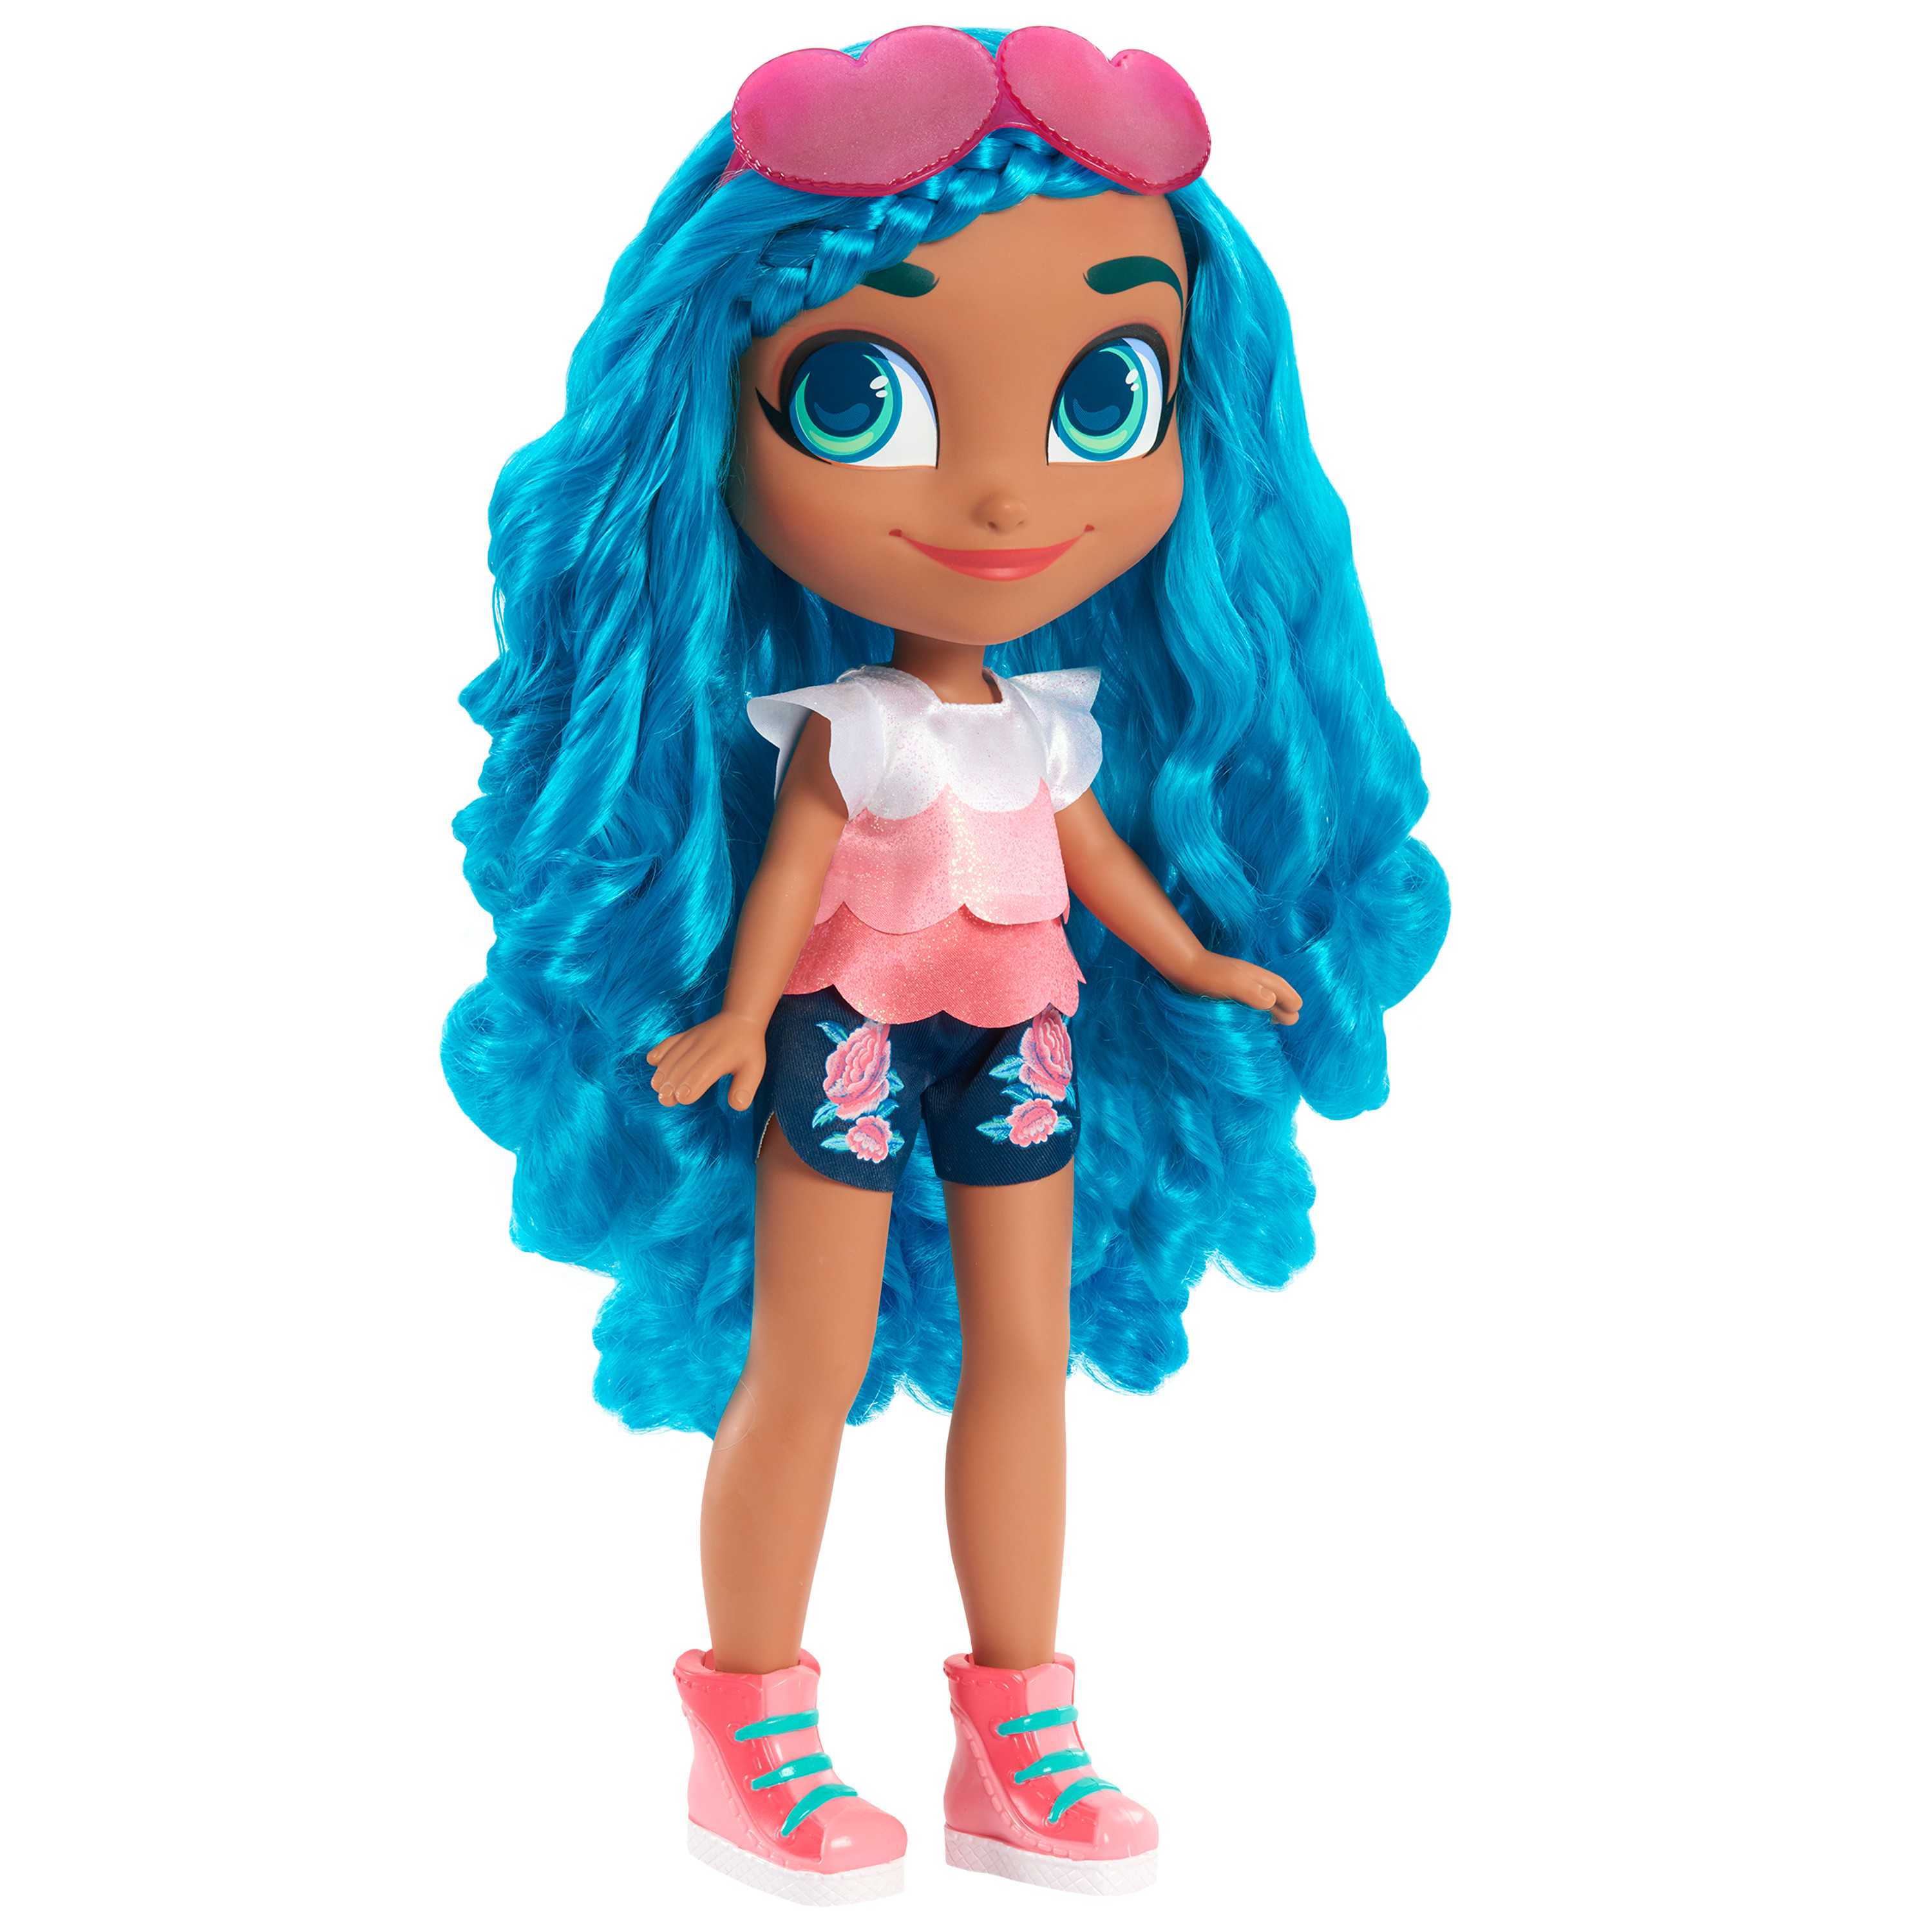 Hairdorables 18-Inch Mystery Fashion Noah Doll, Includes Surprise Outfit, Blue Hair,  Kids Toys for Ages 3 Up, Gifts and Presents - image 2 of 3